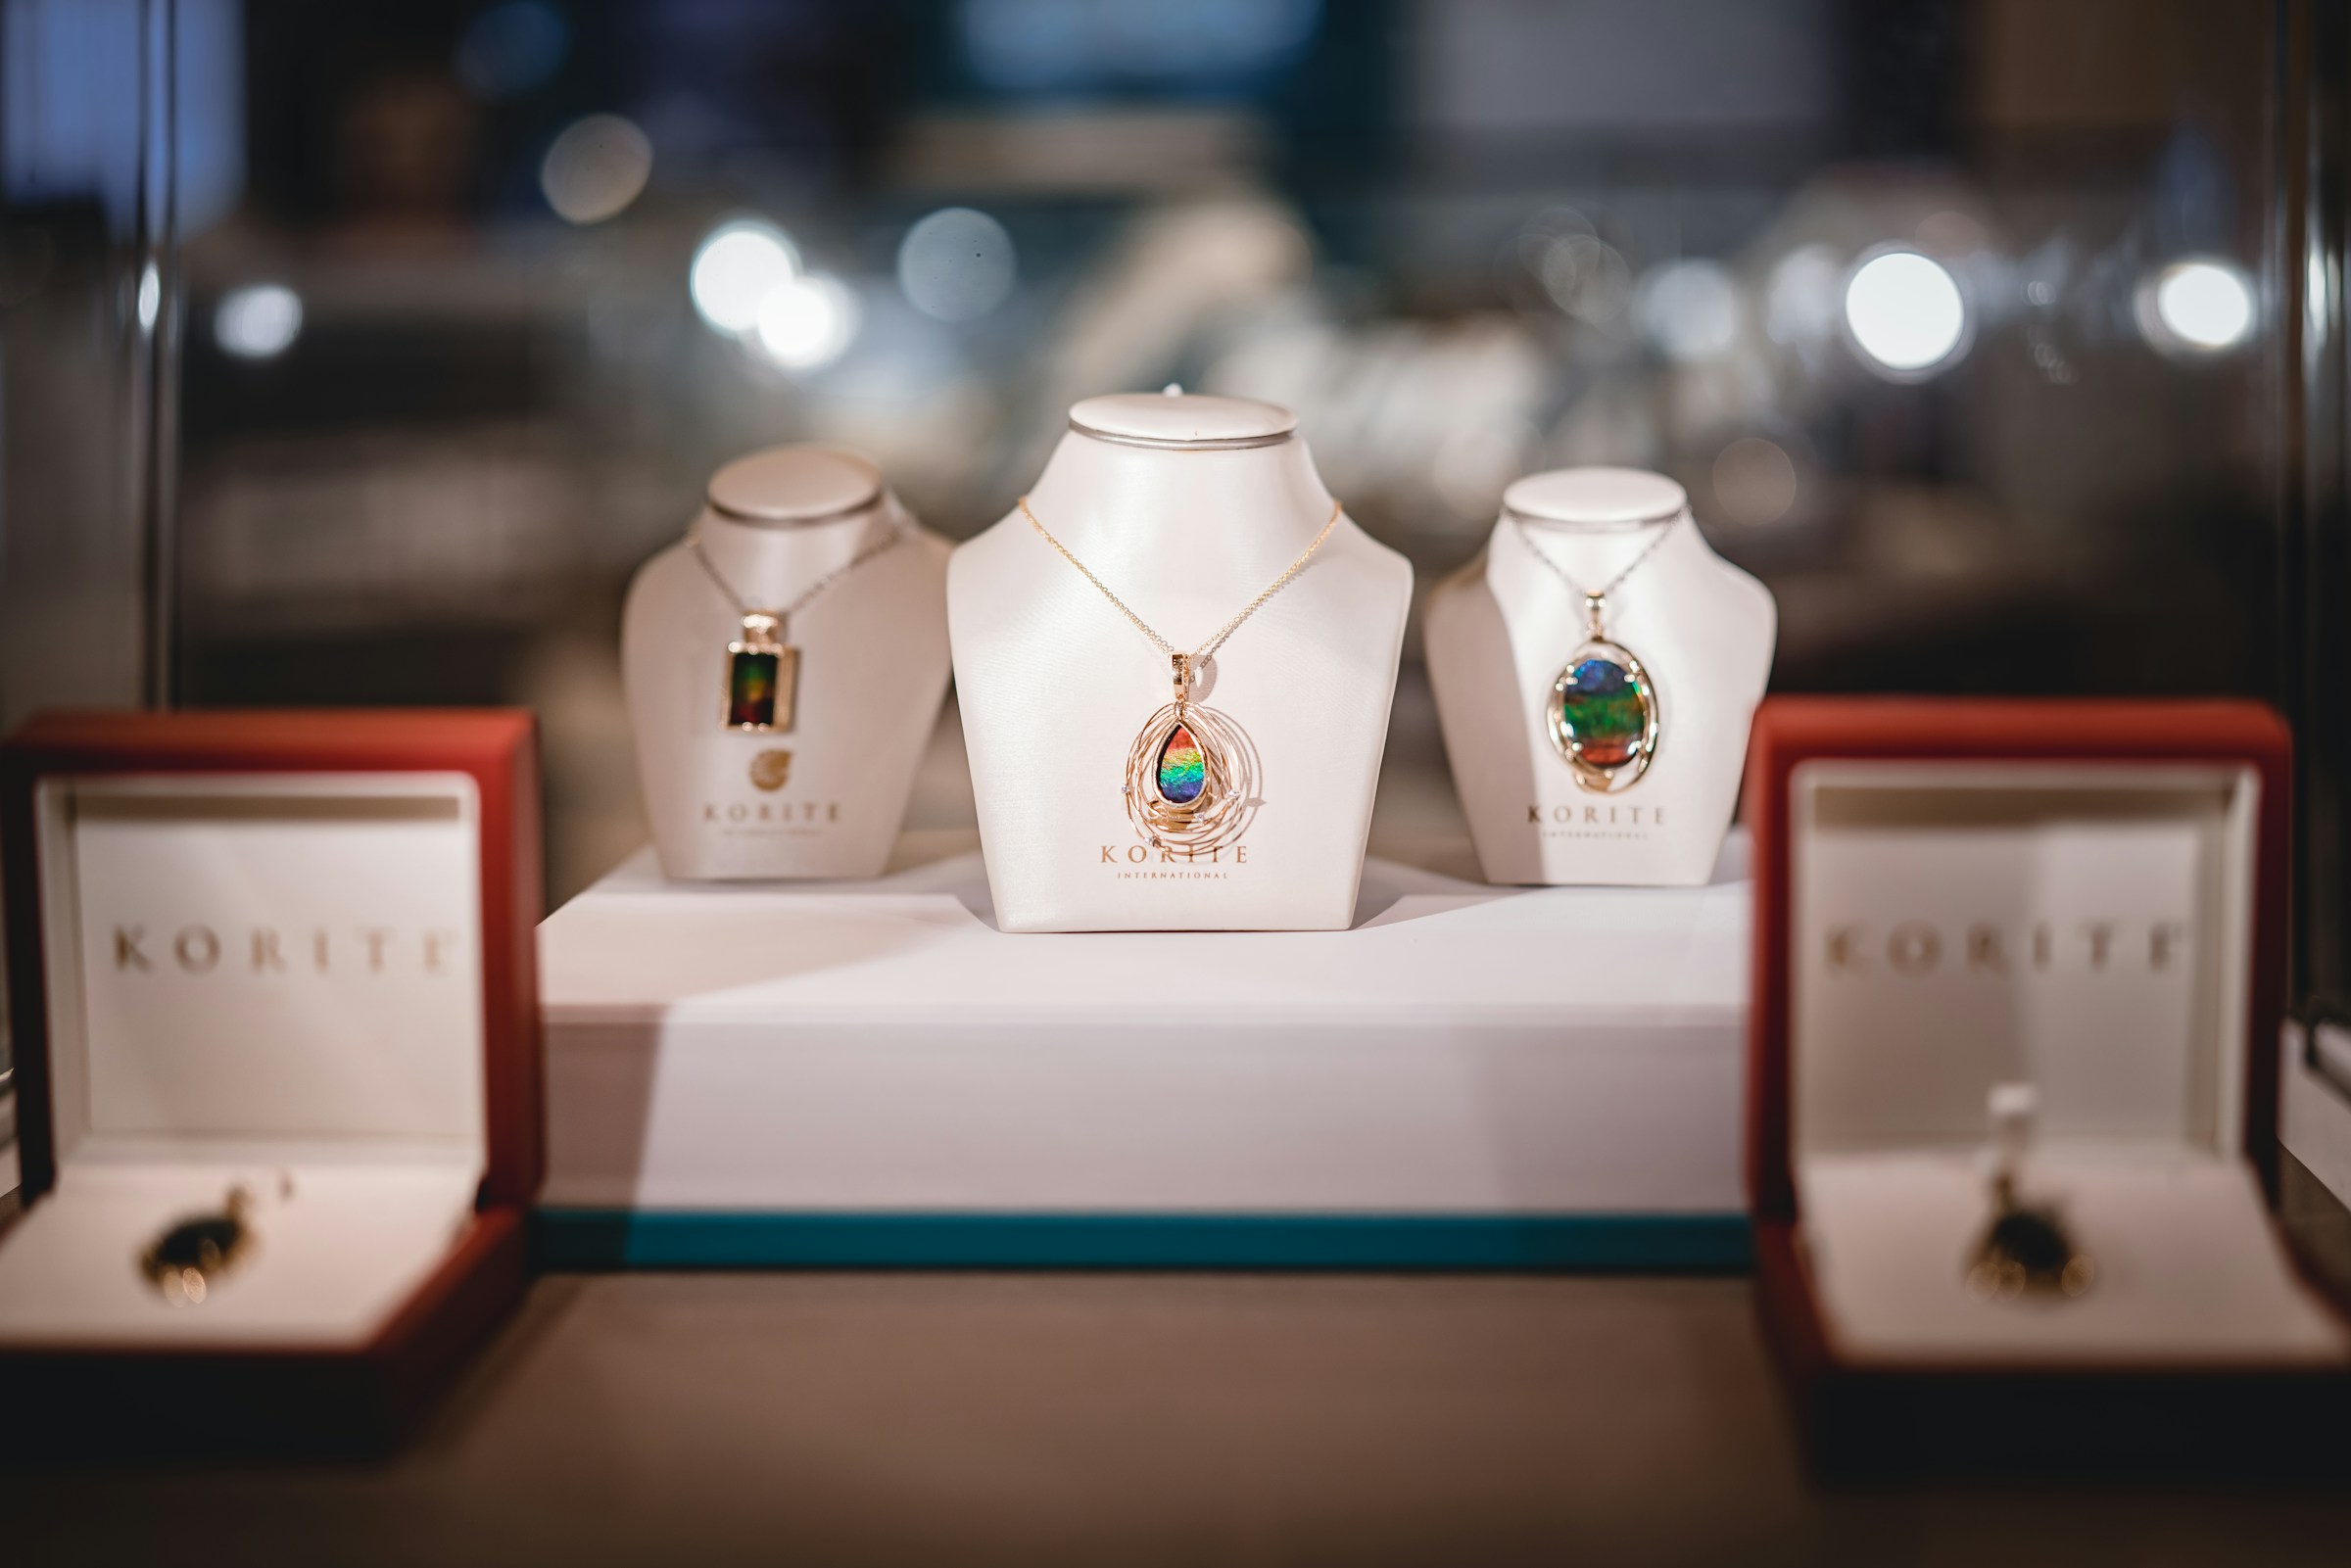 A display at a jewelry store | Source: Unsplash